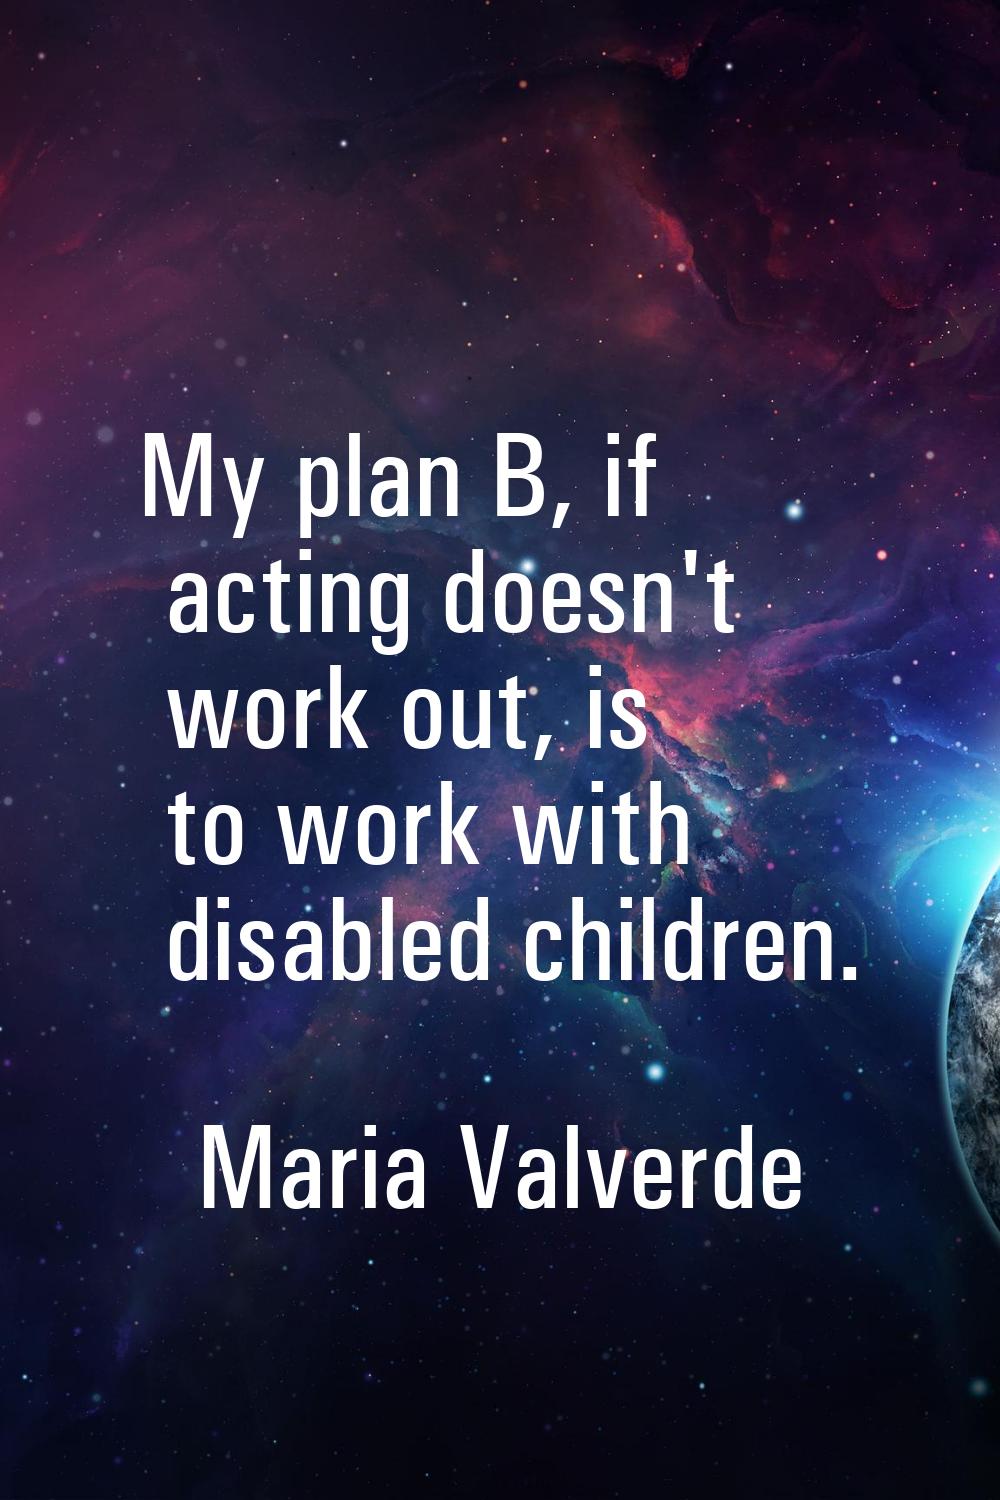 My plan B, if acting doesn't work out, is to work with disabled children.